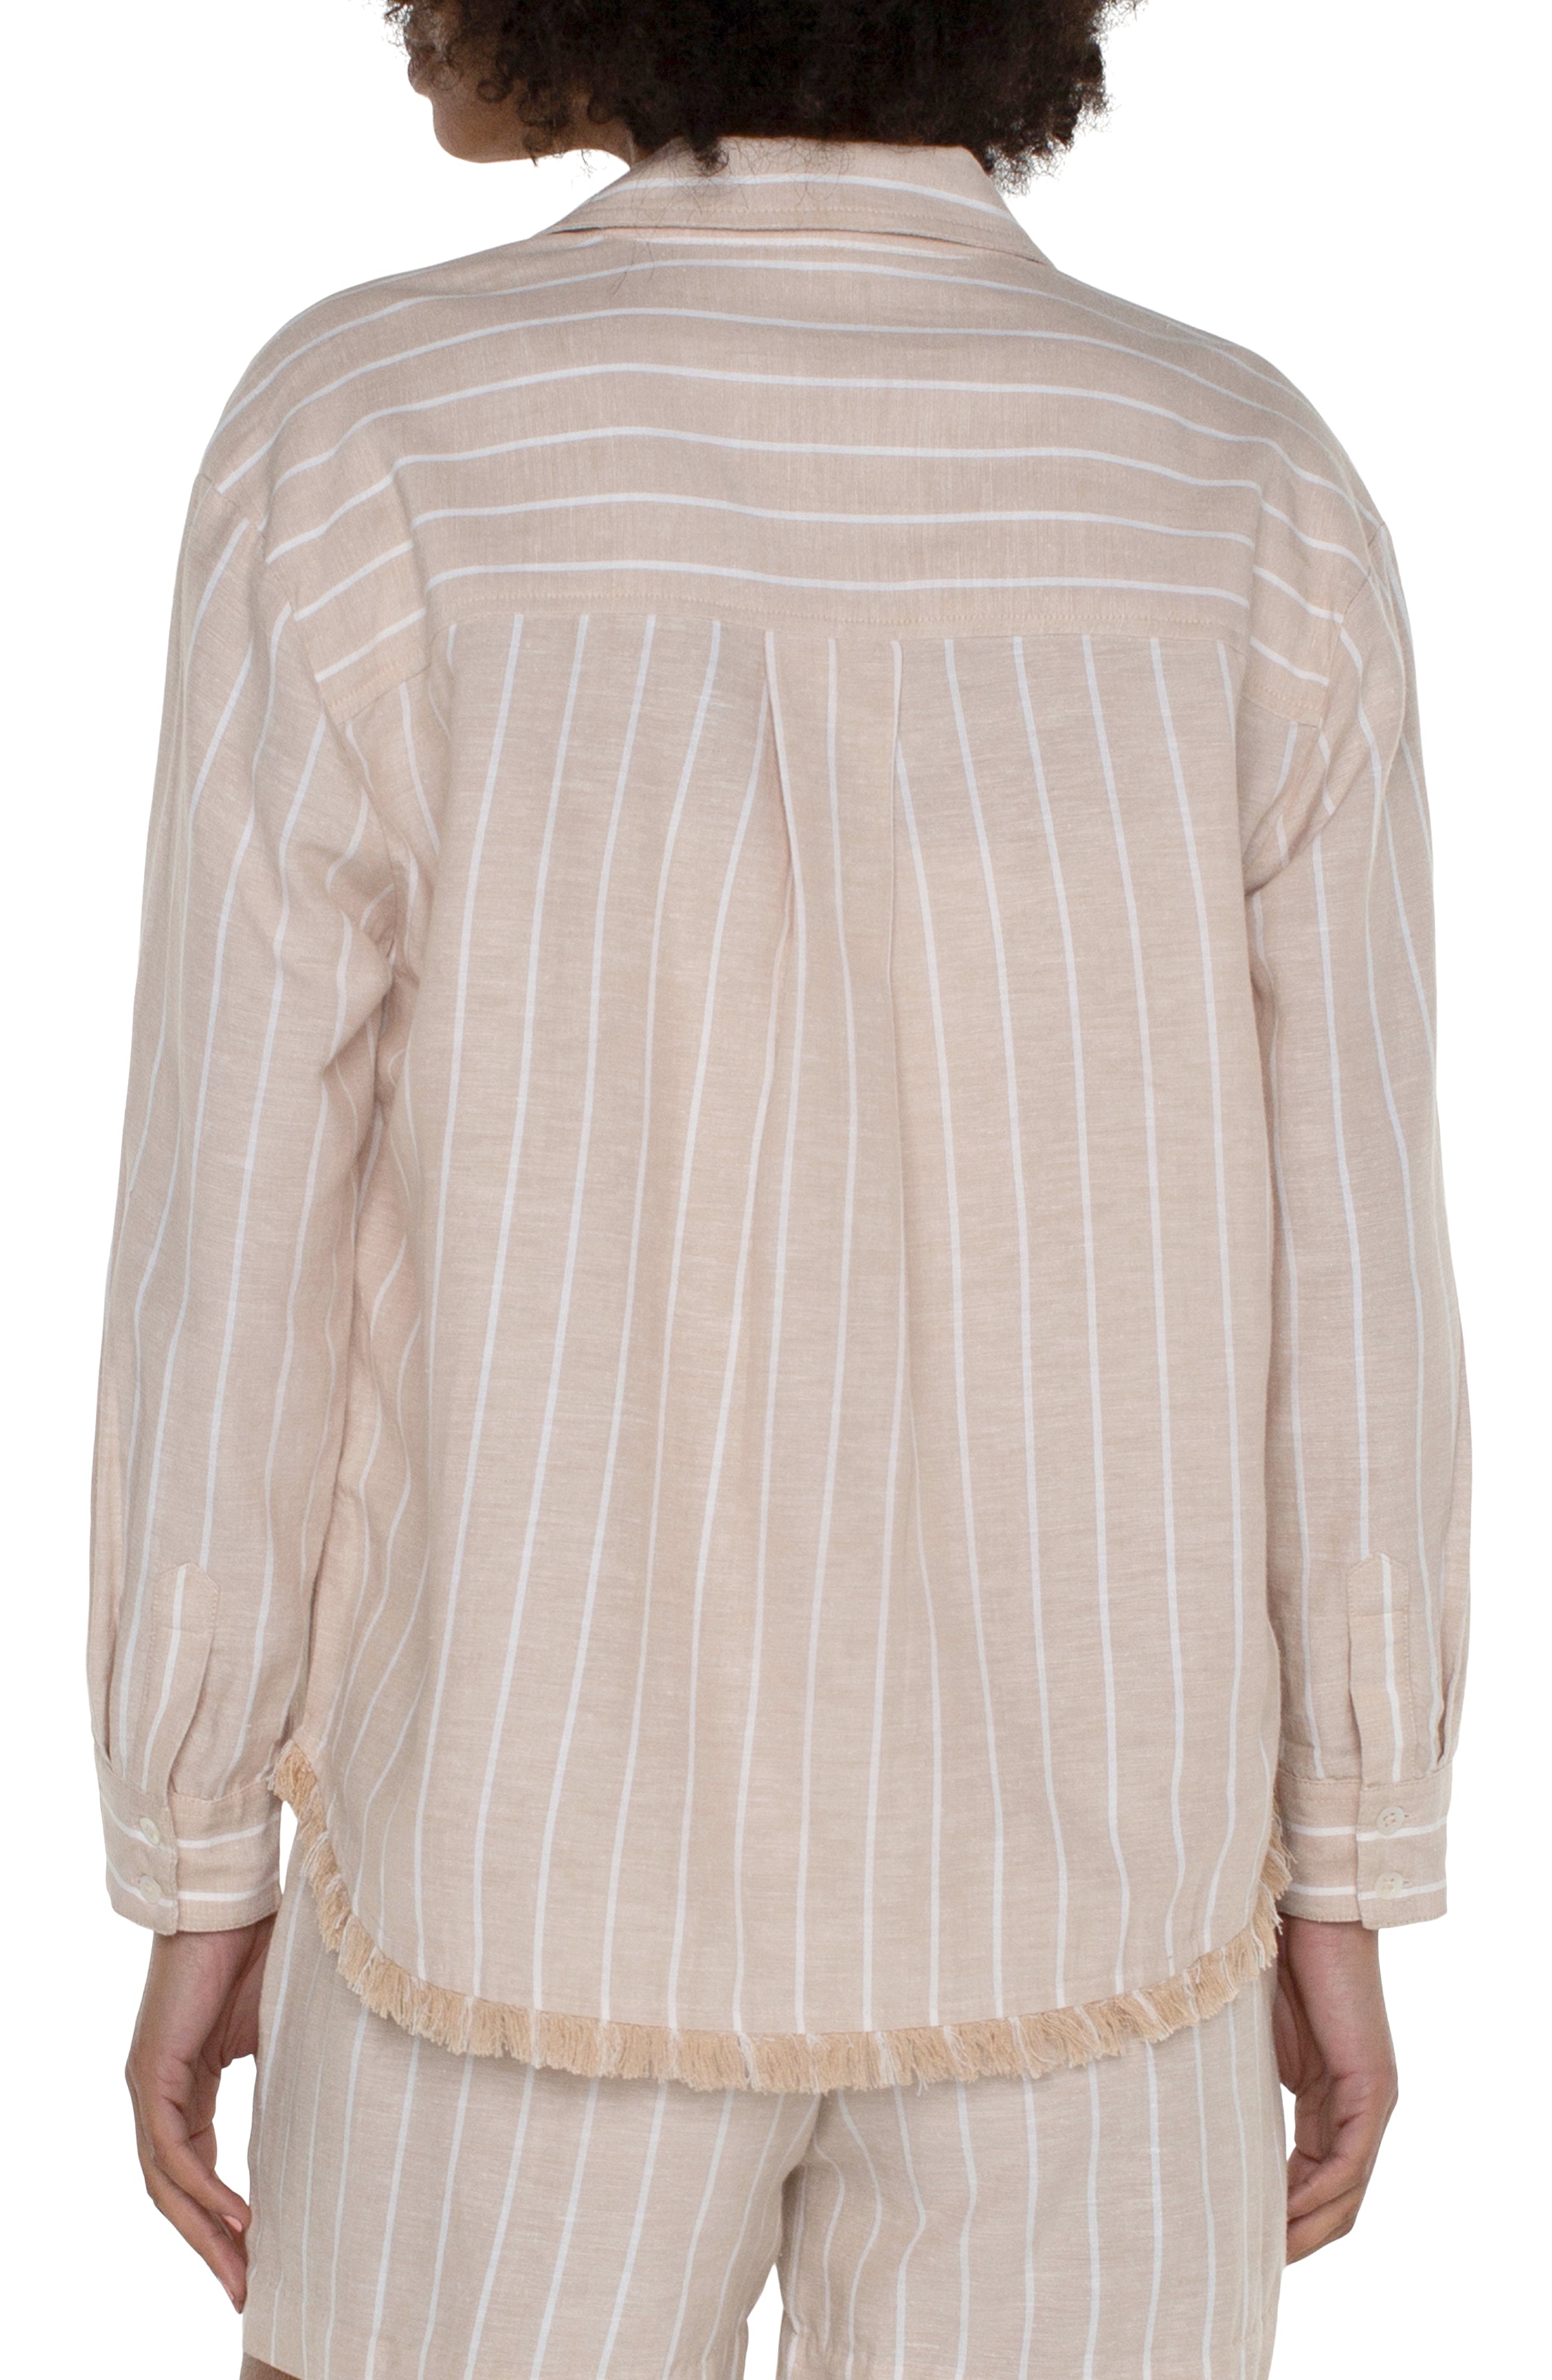 LVP Long Sleeve Button Front Shirt with Fray - Tan Yarn Dyed Stripe Back View